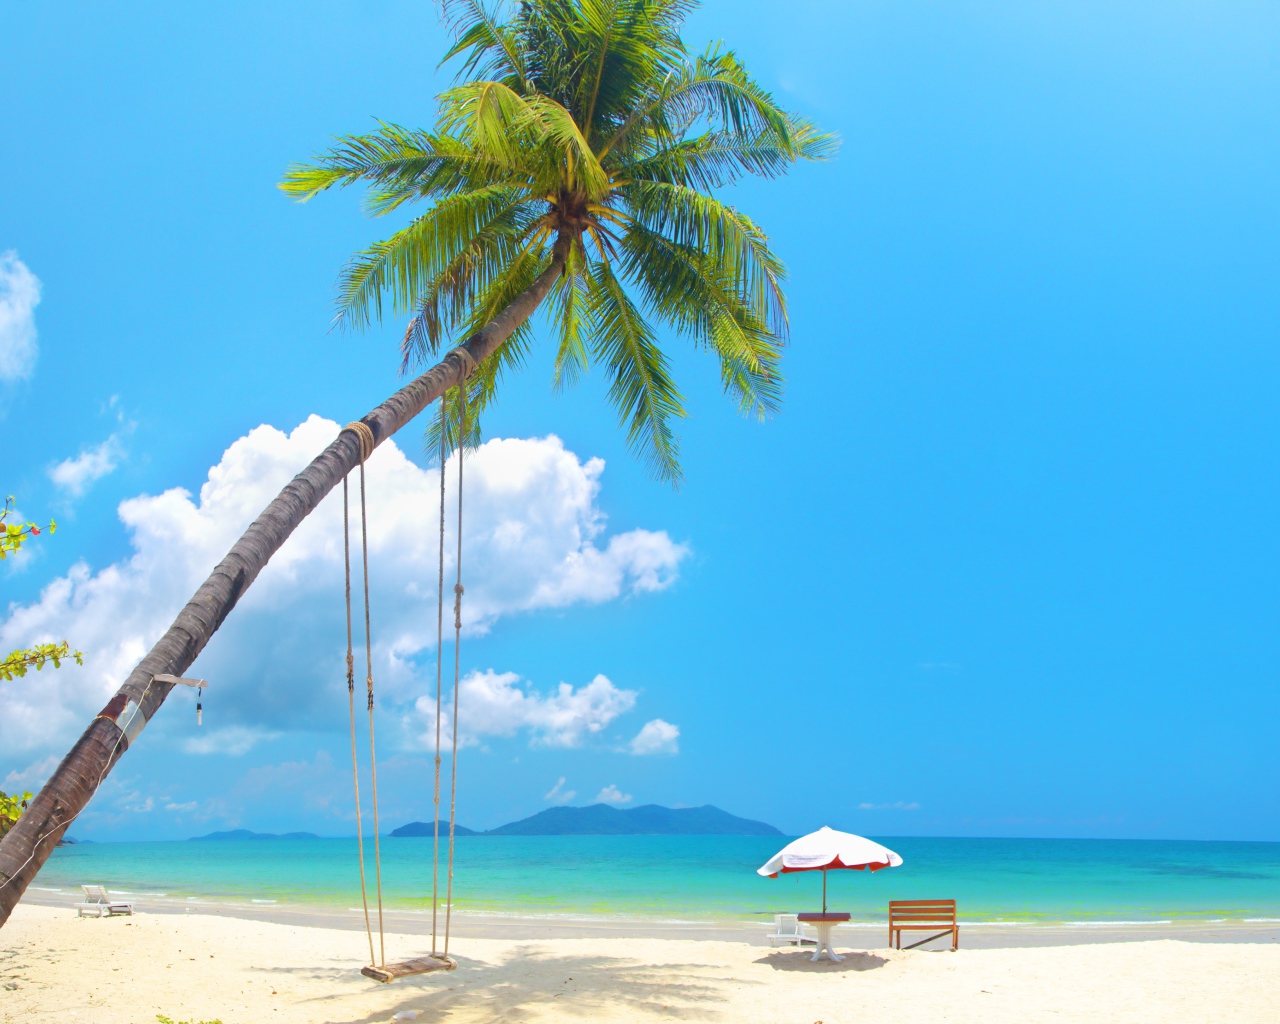 Swing on a palm tree on a white sand beach